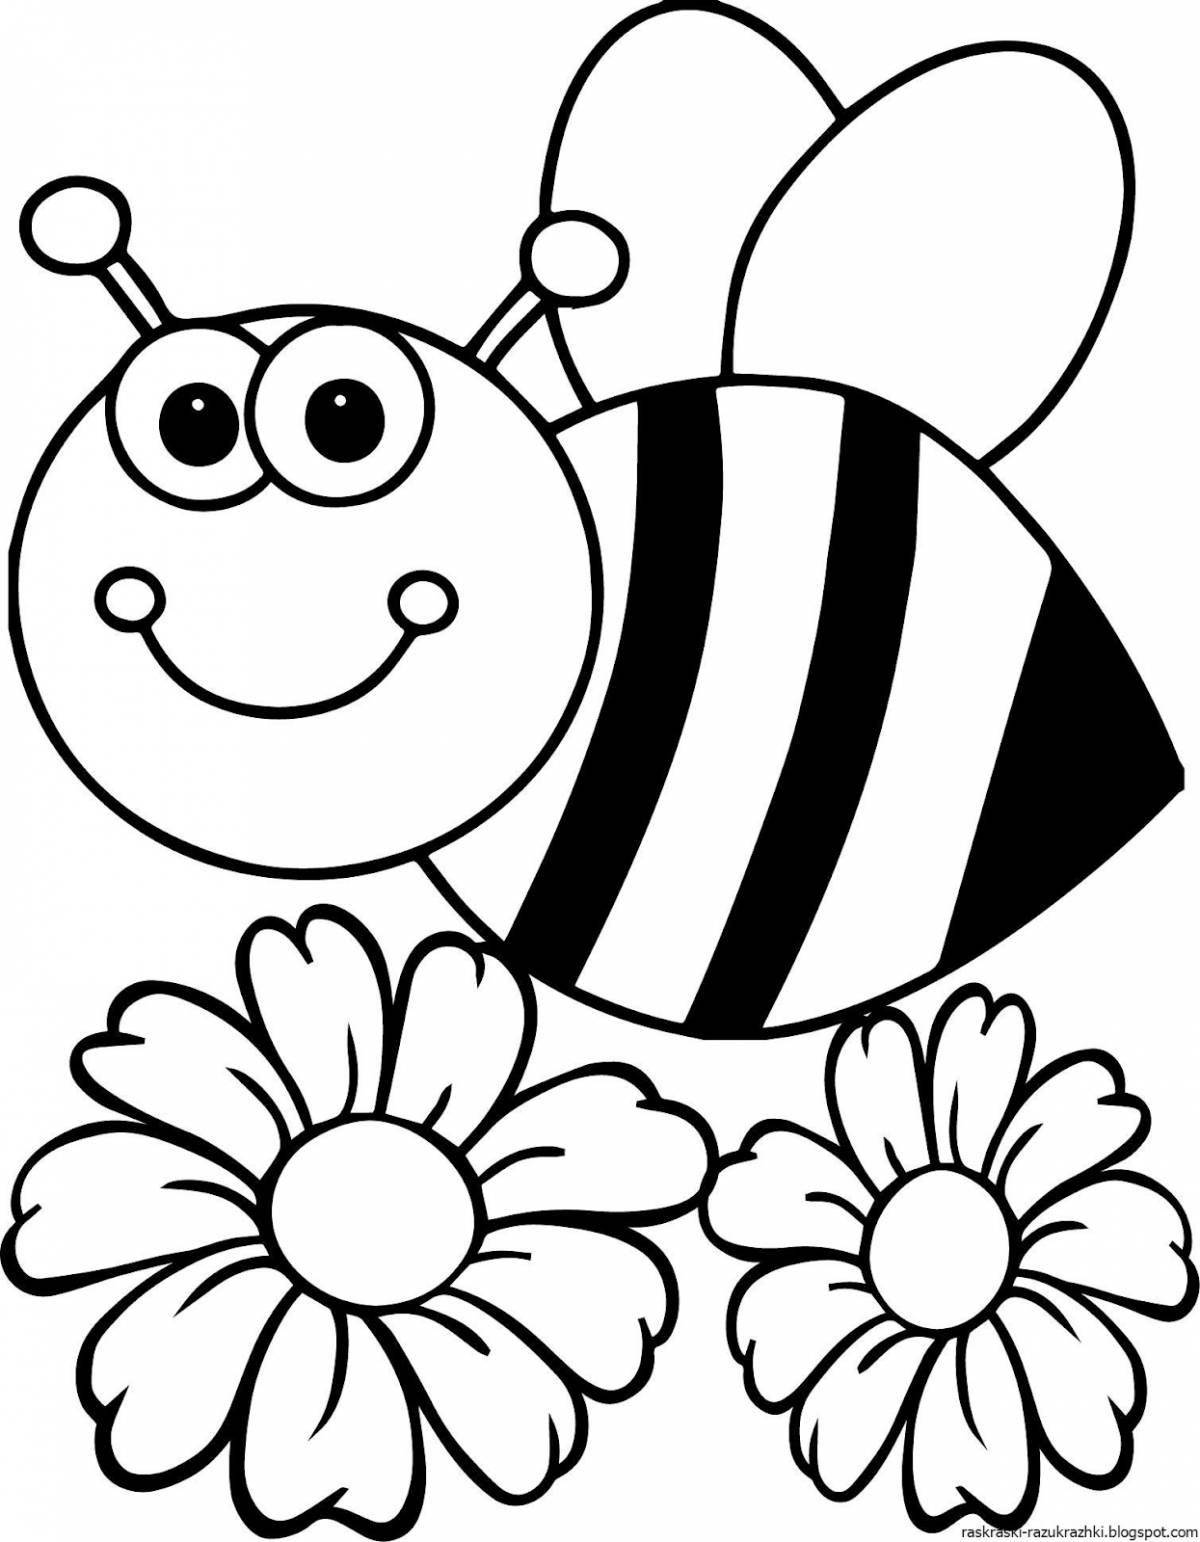 Adorable bee coloring page for 3-4 year olds